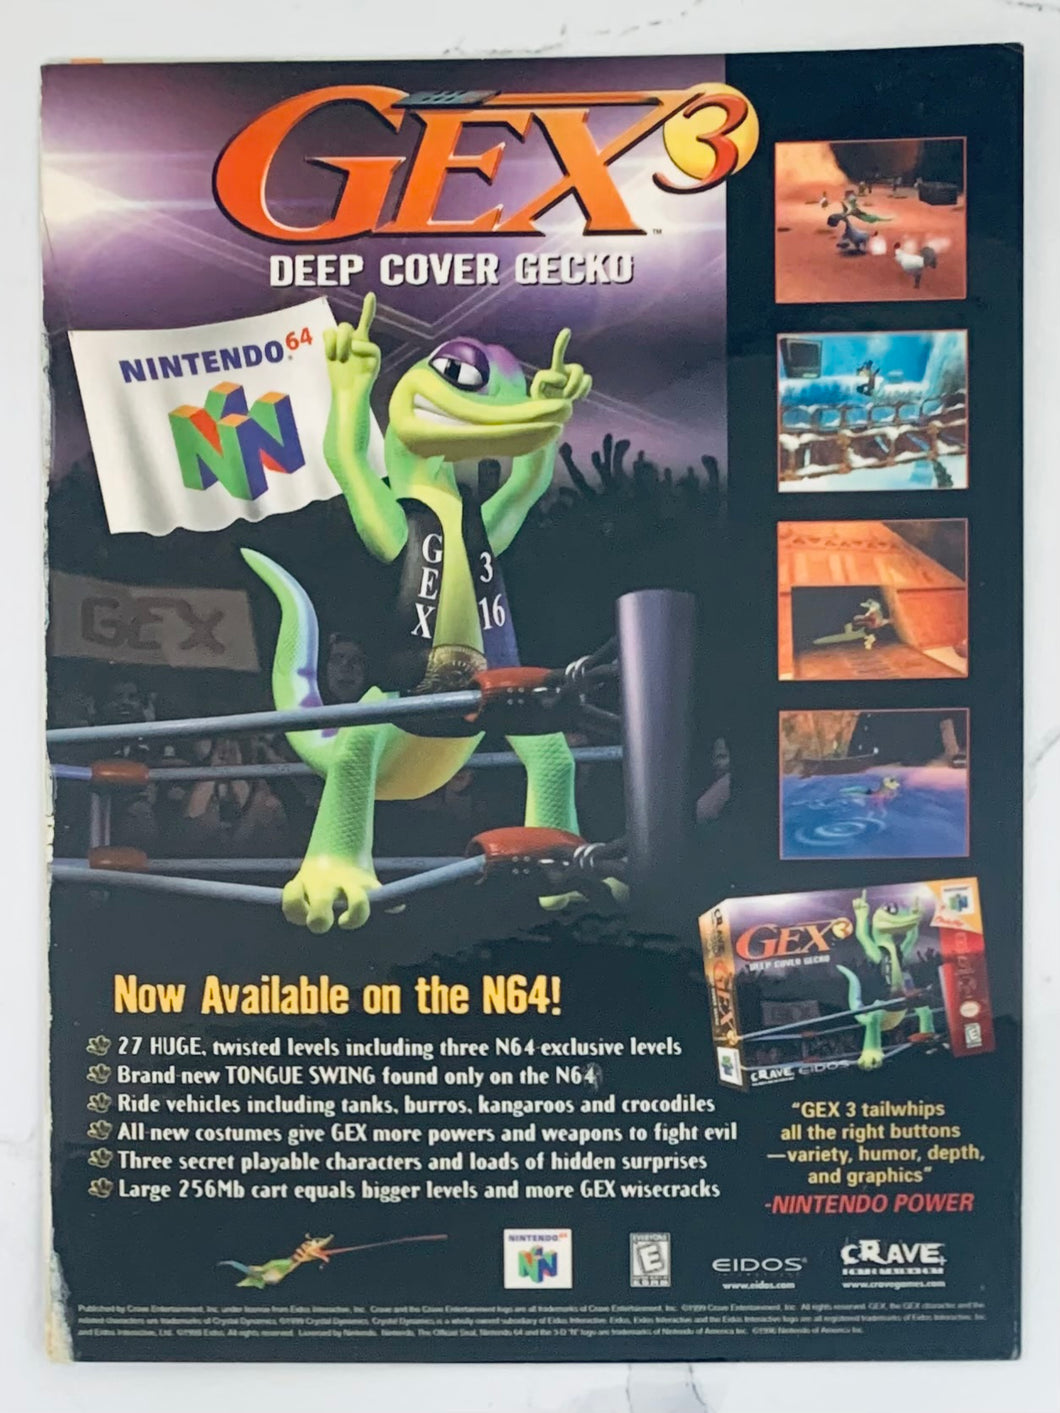 Gex 3: Deep Cover Gecko - N64 - Original Vintage Advertisement - Print Ads - Laminated A4 Poster